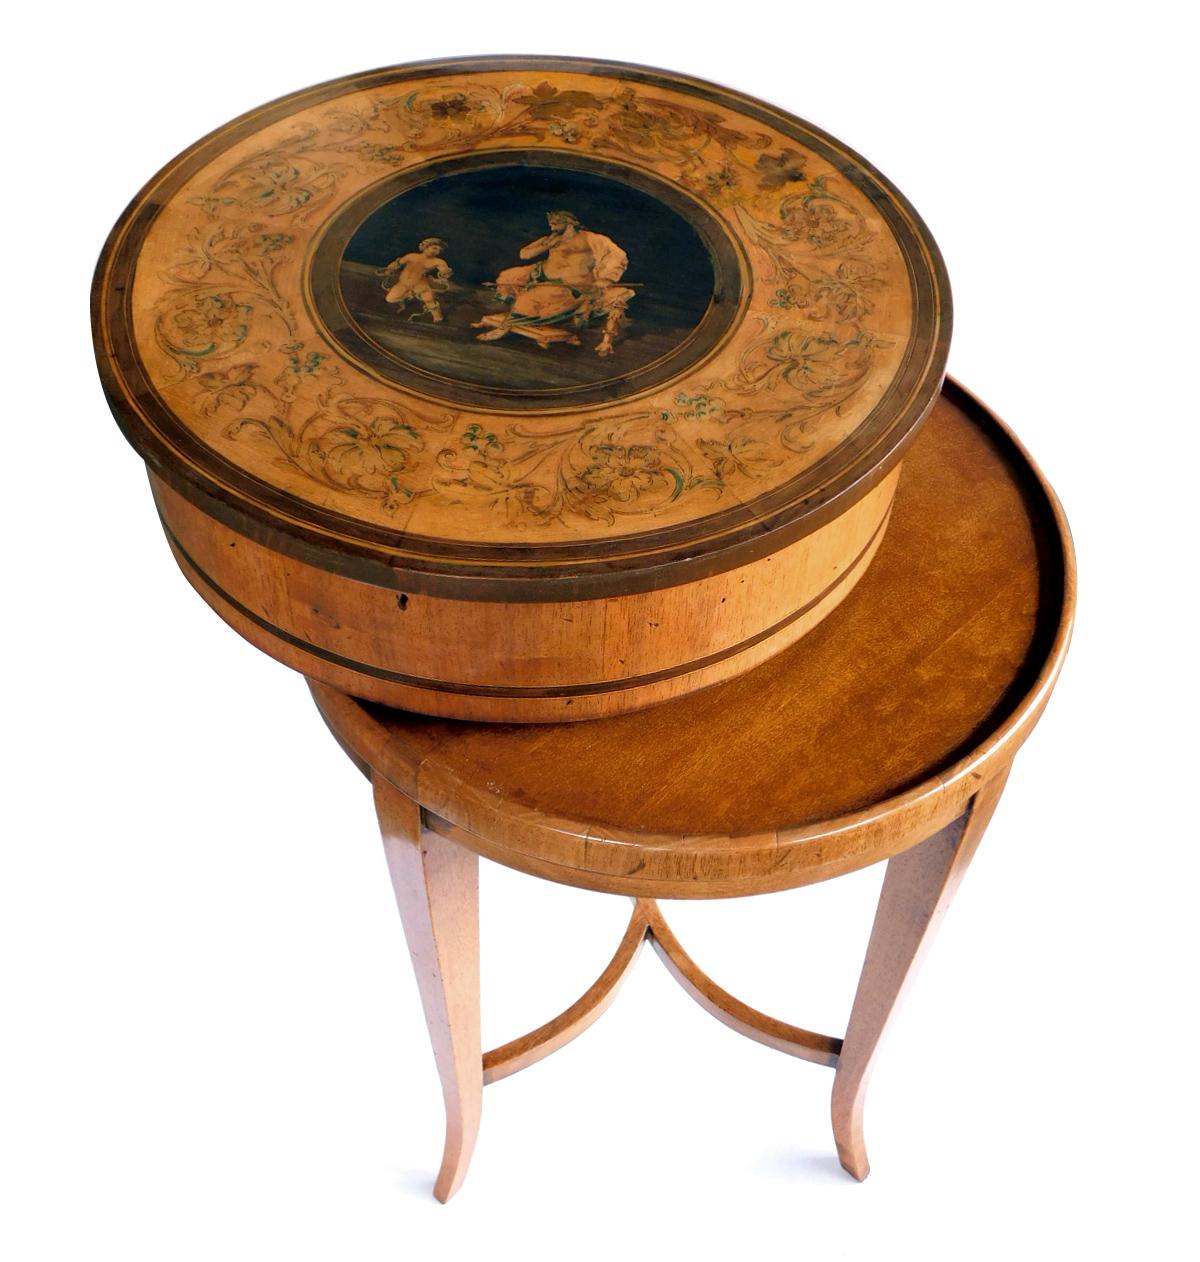 The circular hinged top with scrolling Florentine-style inlaid acanthus leaf and floral band; surrounding an ebonized roundel centering an Italianate figure of a Roman god and putto; with Antonio's antiques retail tags.